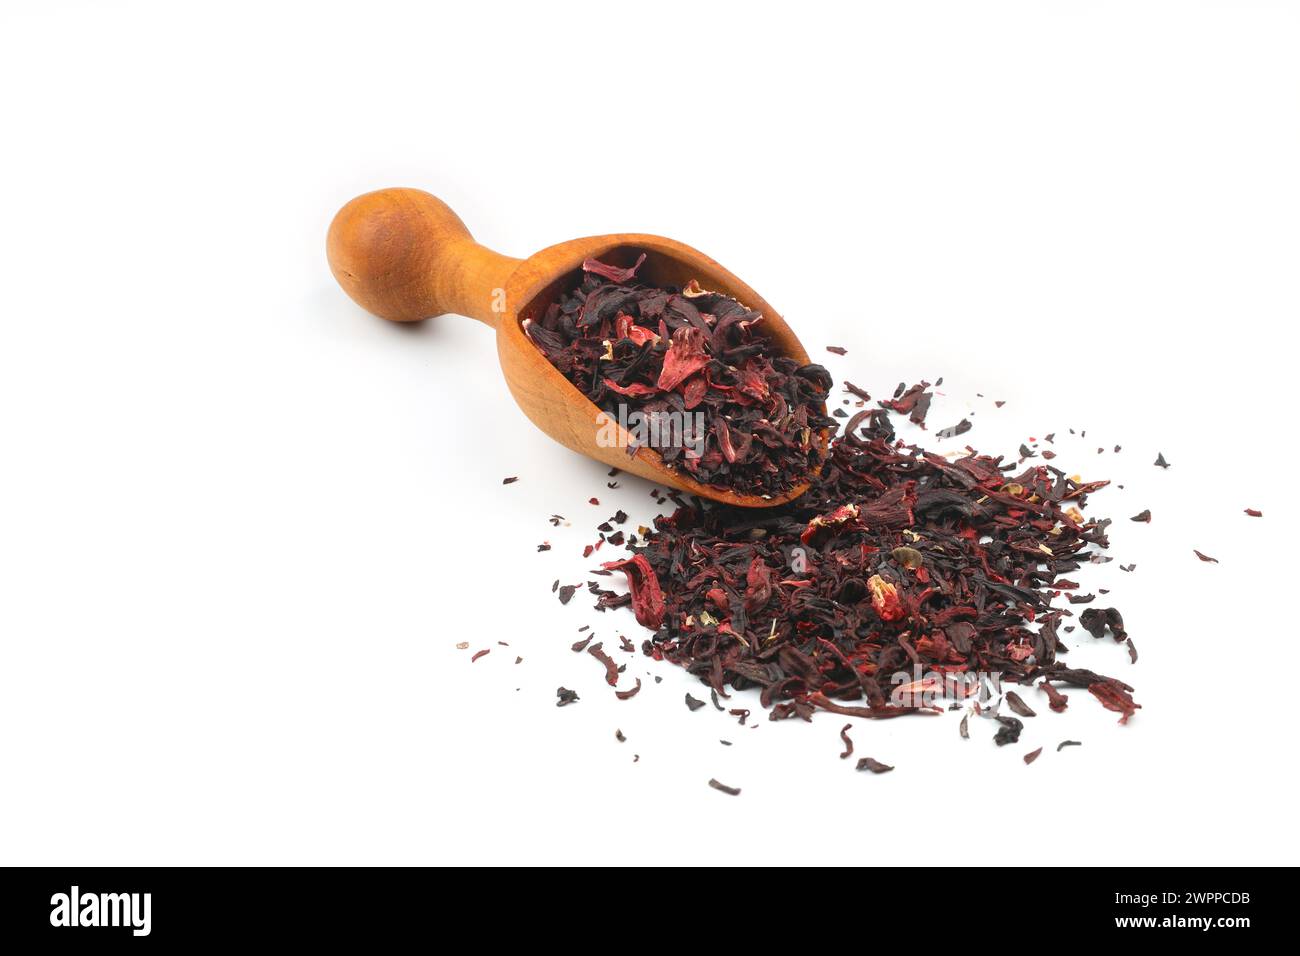 Karkade tea. Hibiscus tea leaves in wooden scoop isolated on white background. File contains clipping path. Top view. Stock Photo